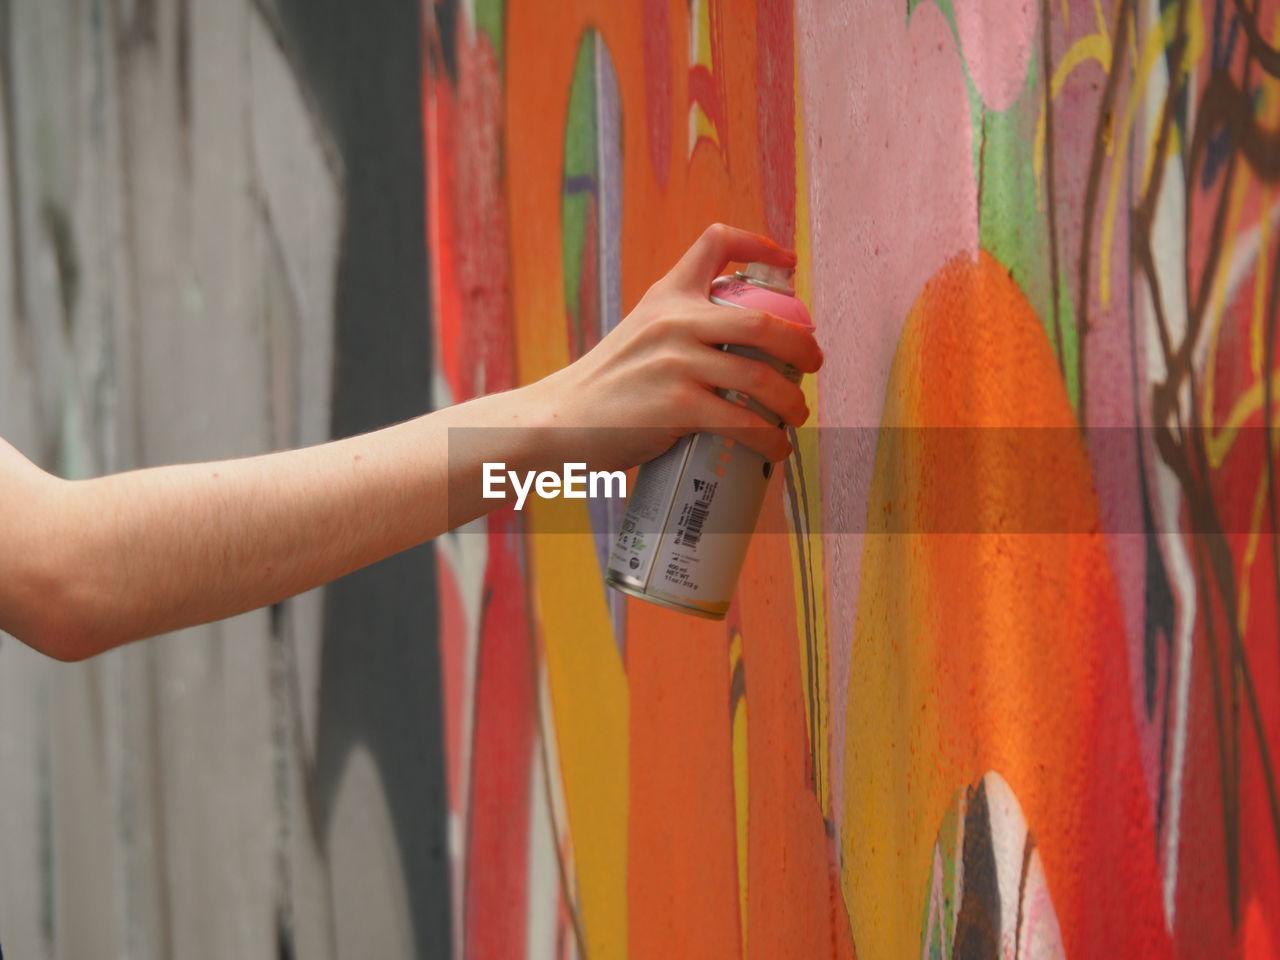 Cropped image of person painting graffiti on wall